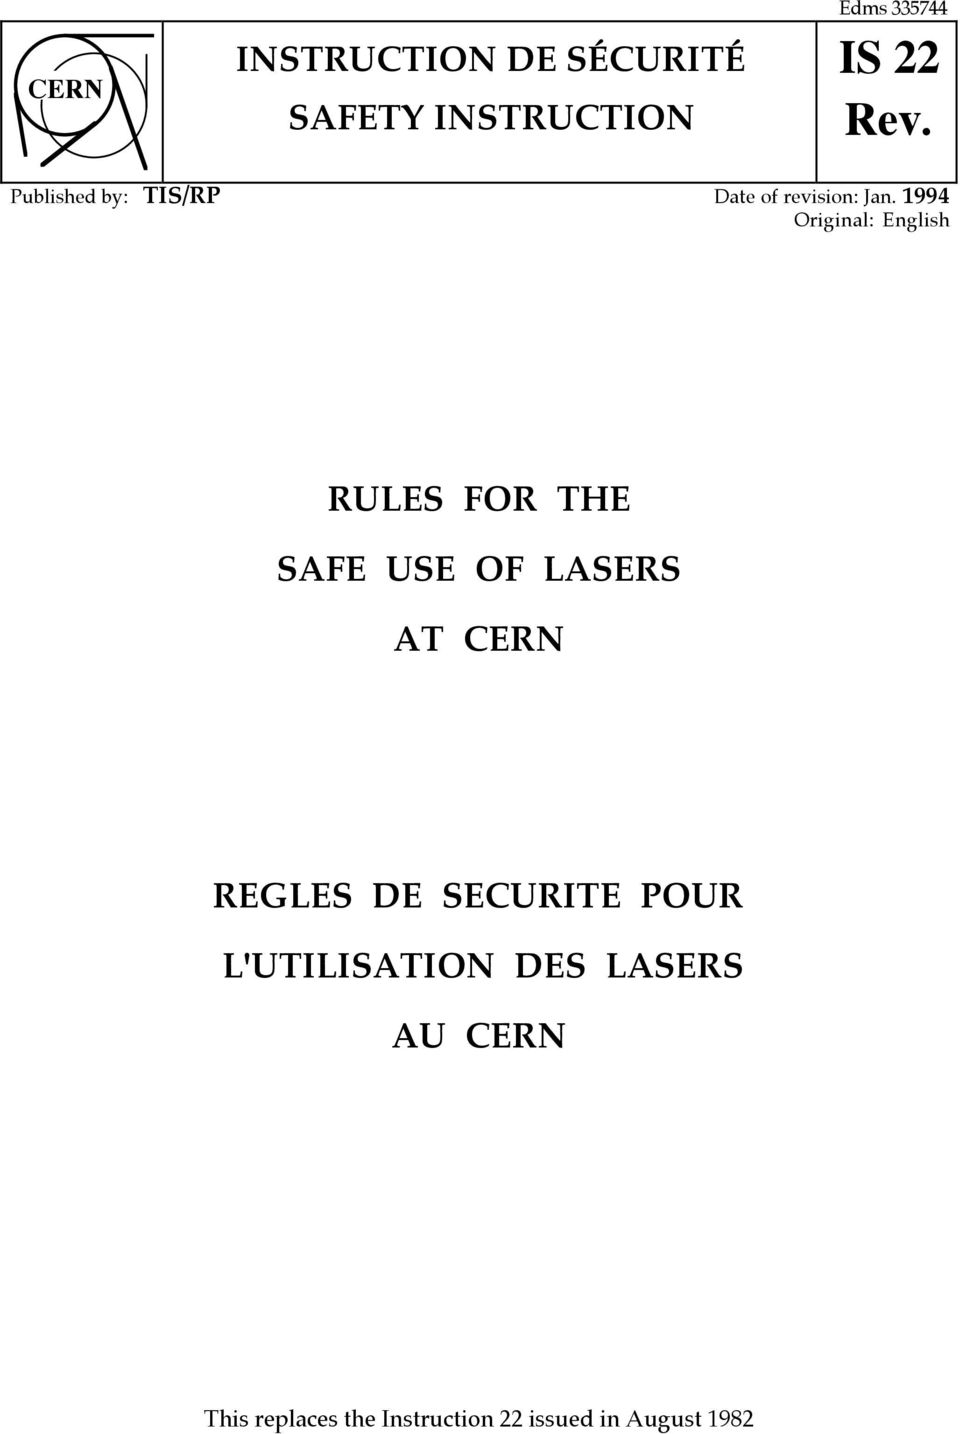 1994 Original: English RULES FOR THE SAFE USE OF LASERS AT CERN REGLES